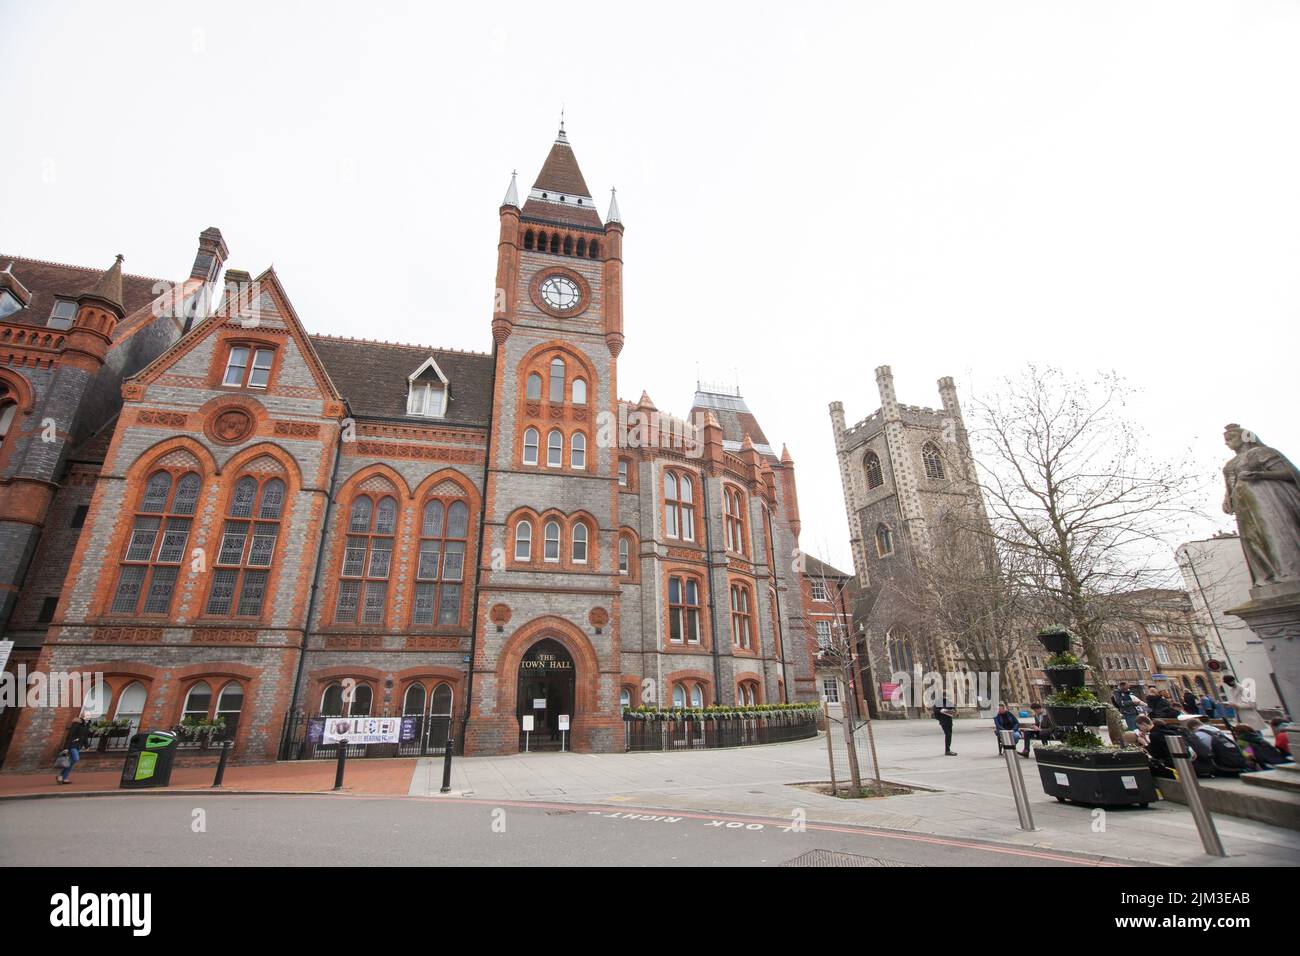 Views of the Town Hall and Blagrave Street in Reading, Berkshire in the UK Stock Photo